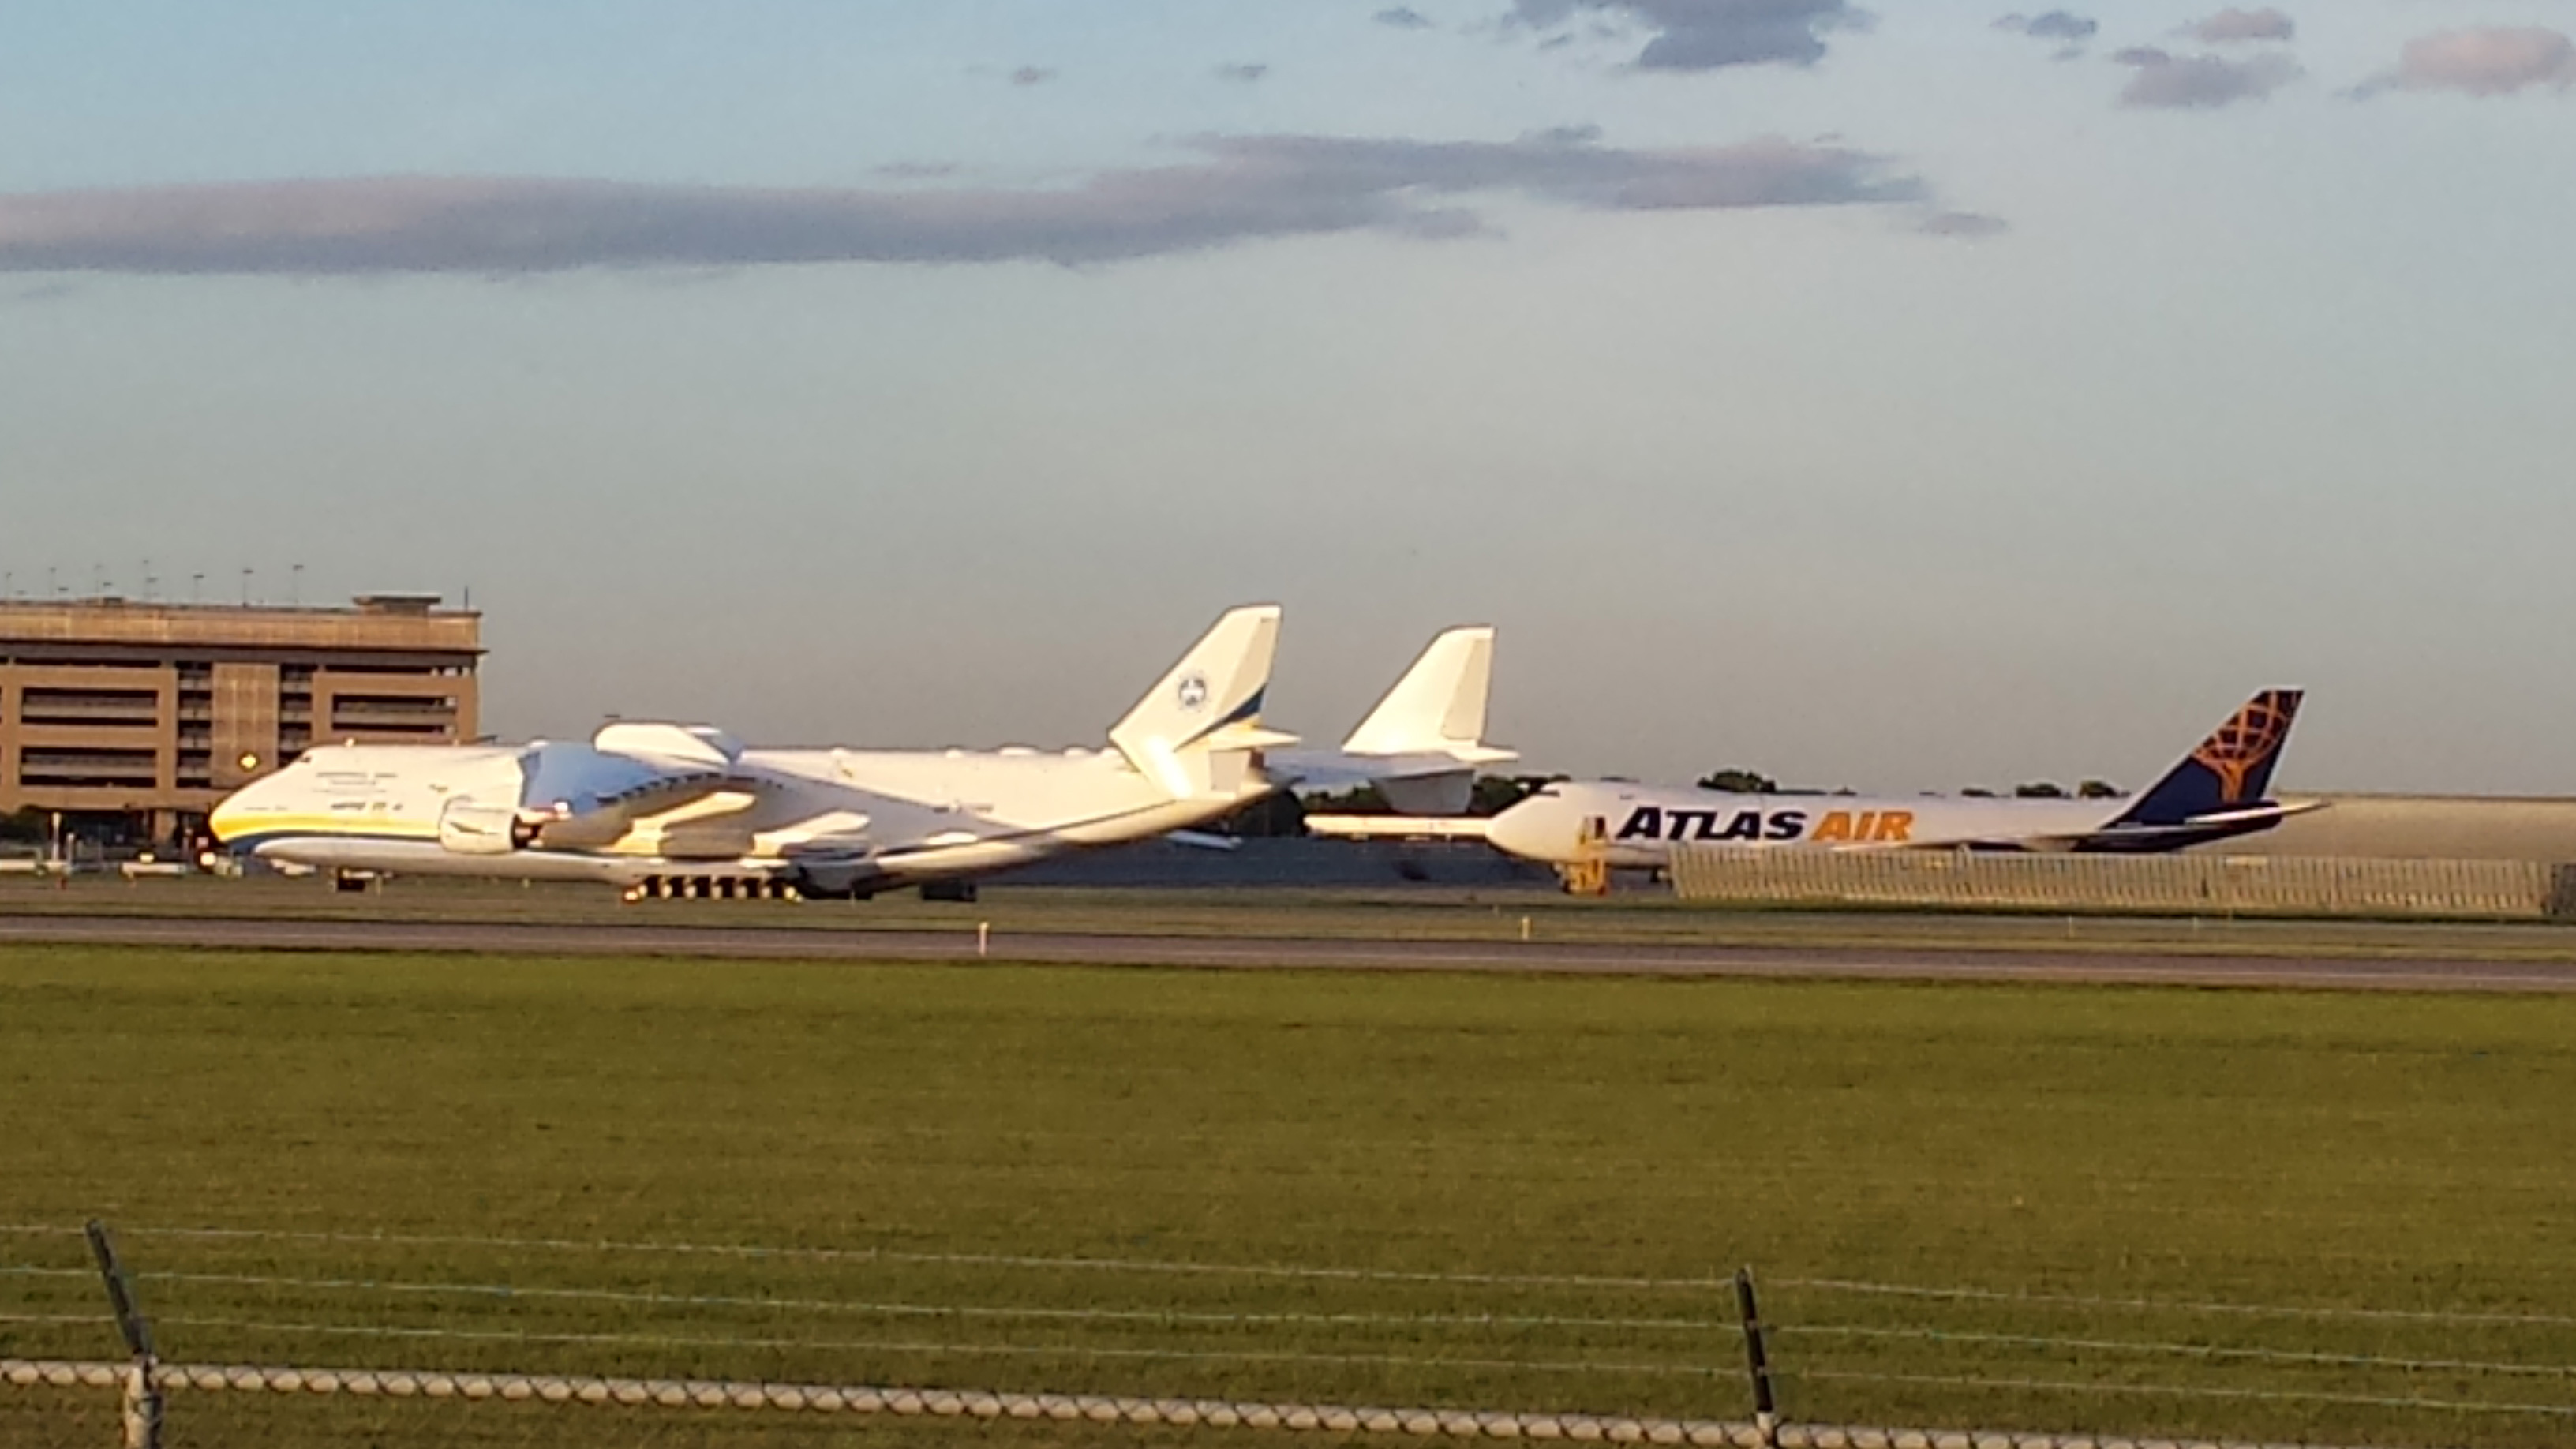 A 747, diverted from Chicago because of storms, is dwarfed by the Antonov 225 at Minneapolis Saint Paul International Airport.  Photo: Bill Catlin/Minnesota Public Radio News.